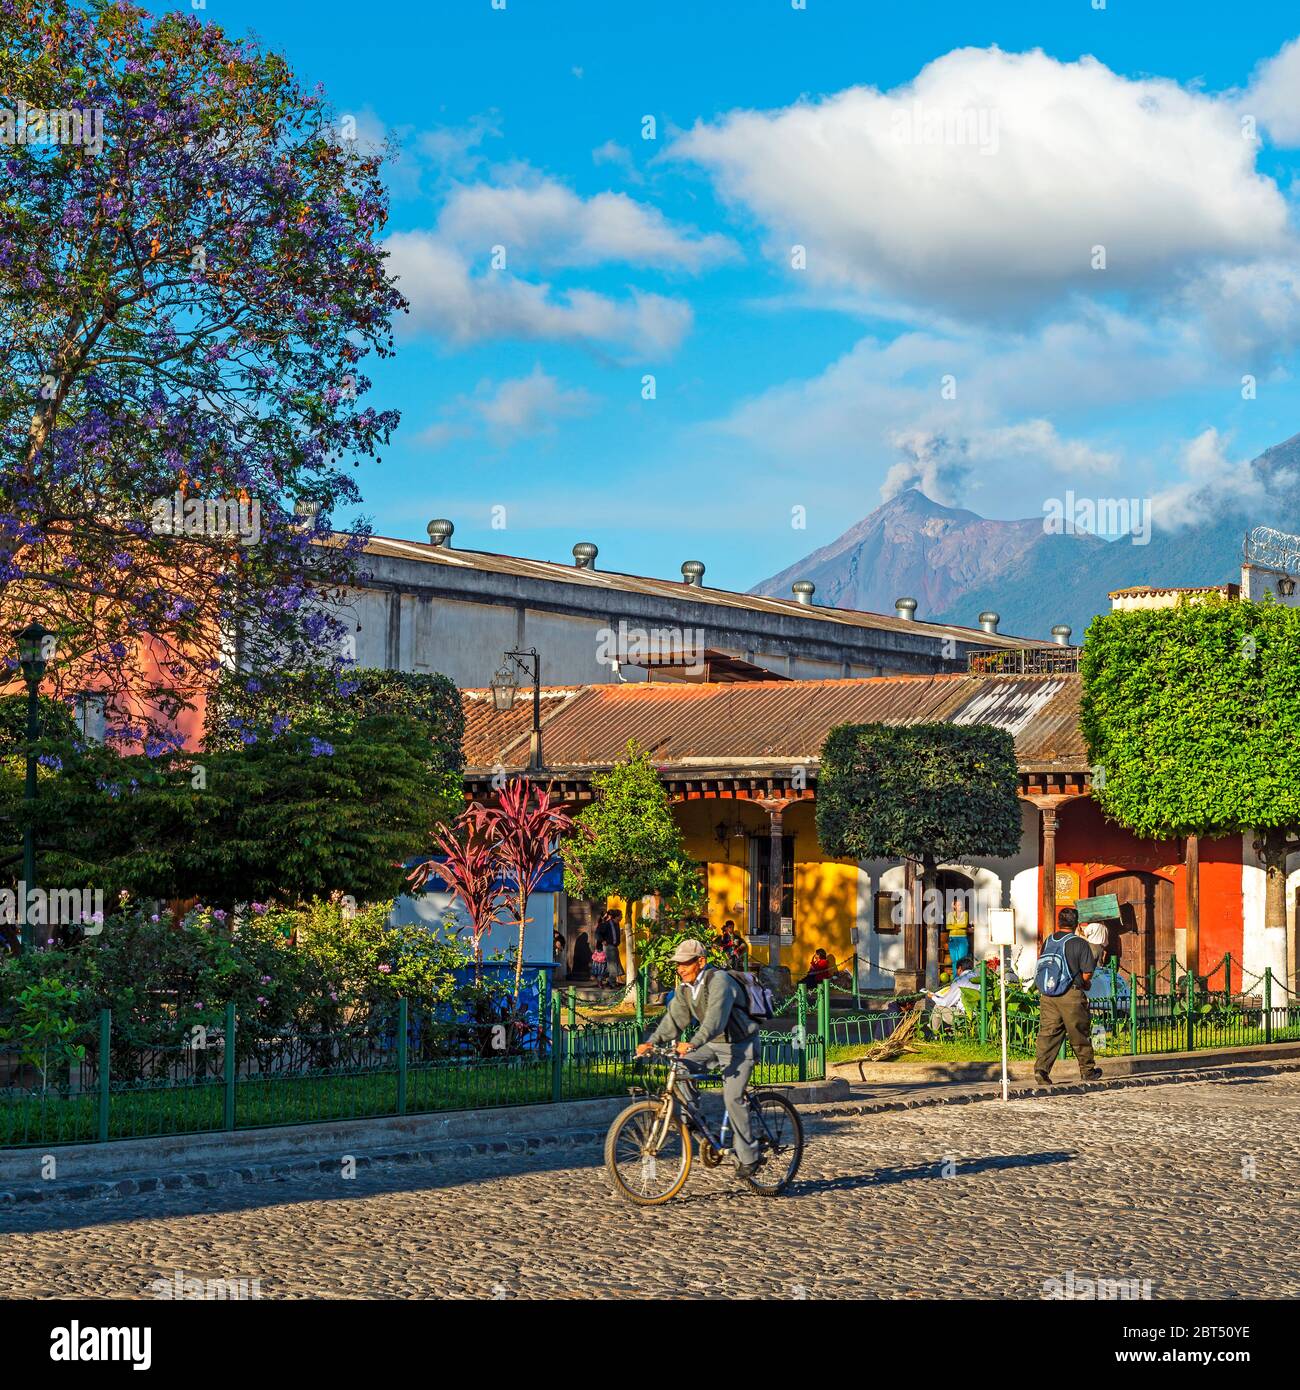 City life in Antigua with a senior man riding a bicycle during a volcanic ash explosion and eruption of the Fuego volcano, Guatemala. Stock Photo